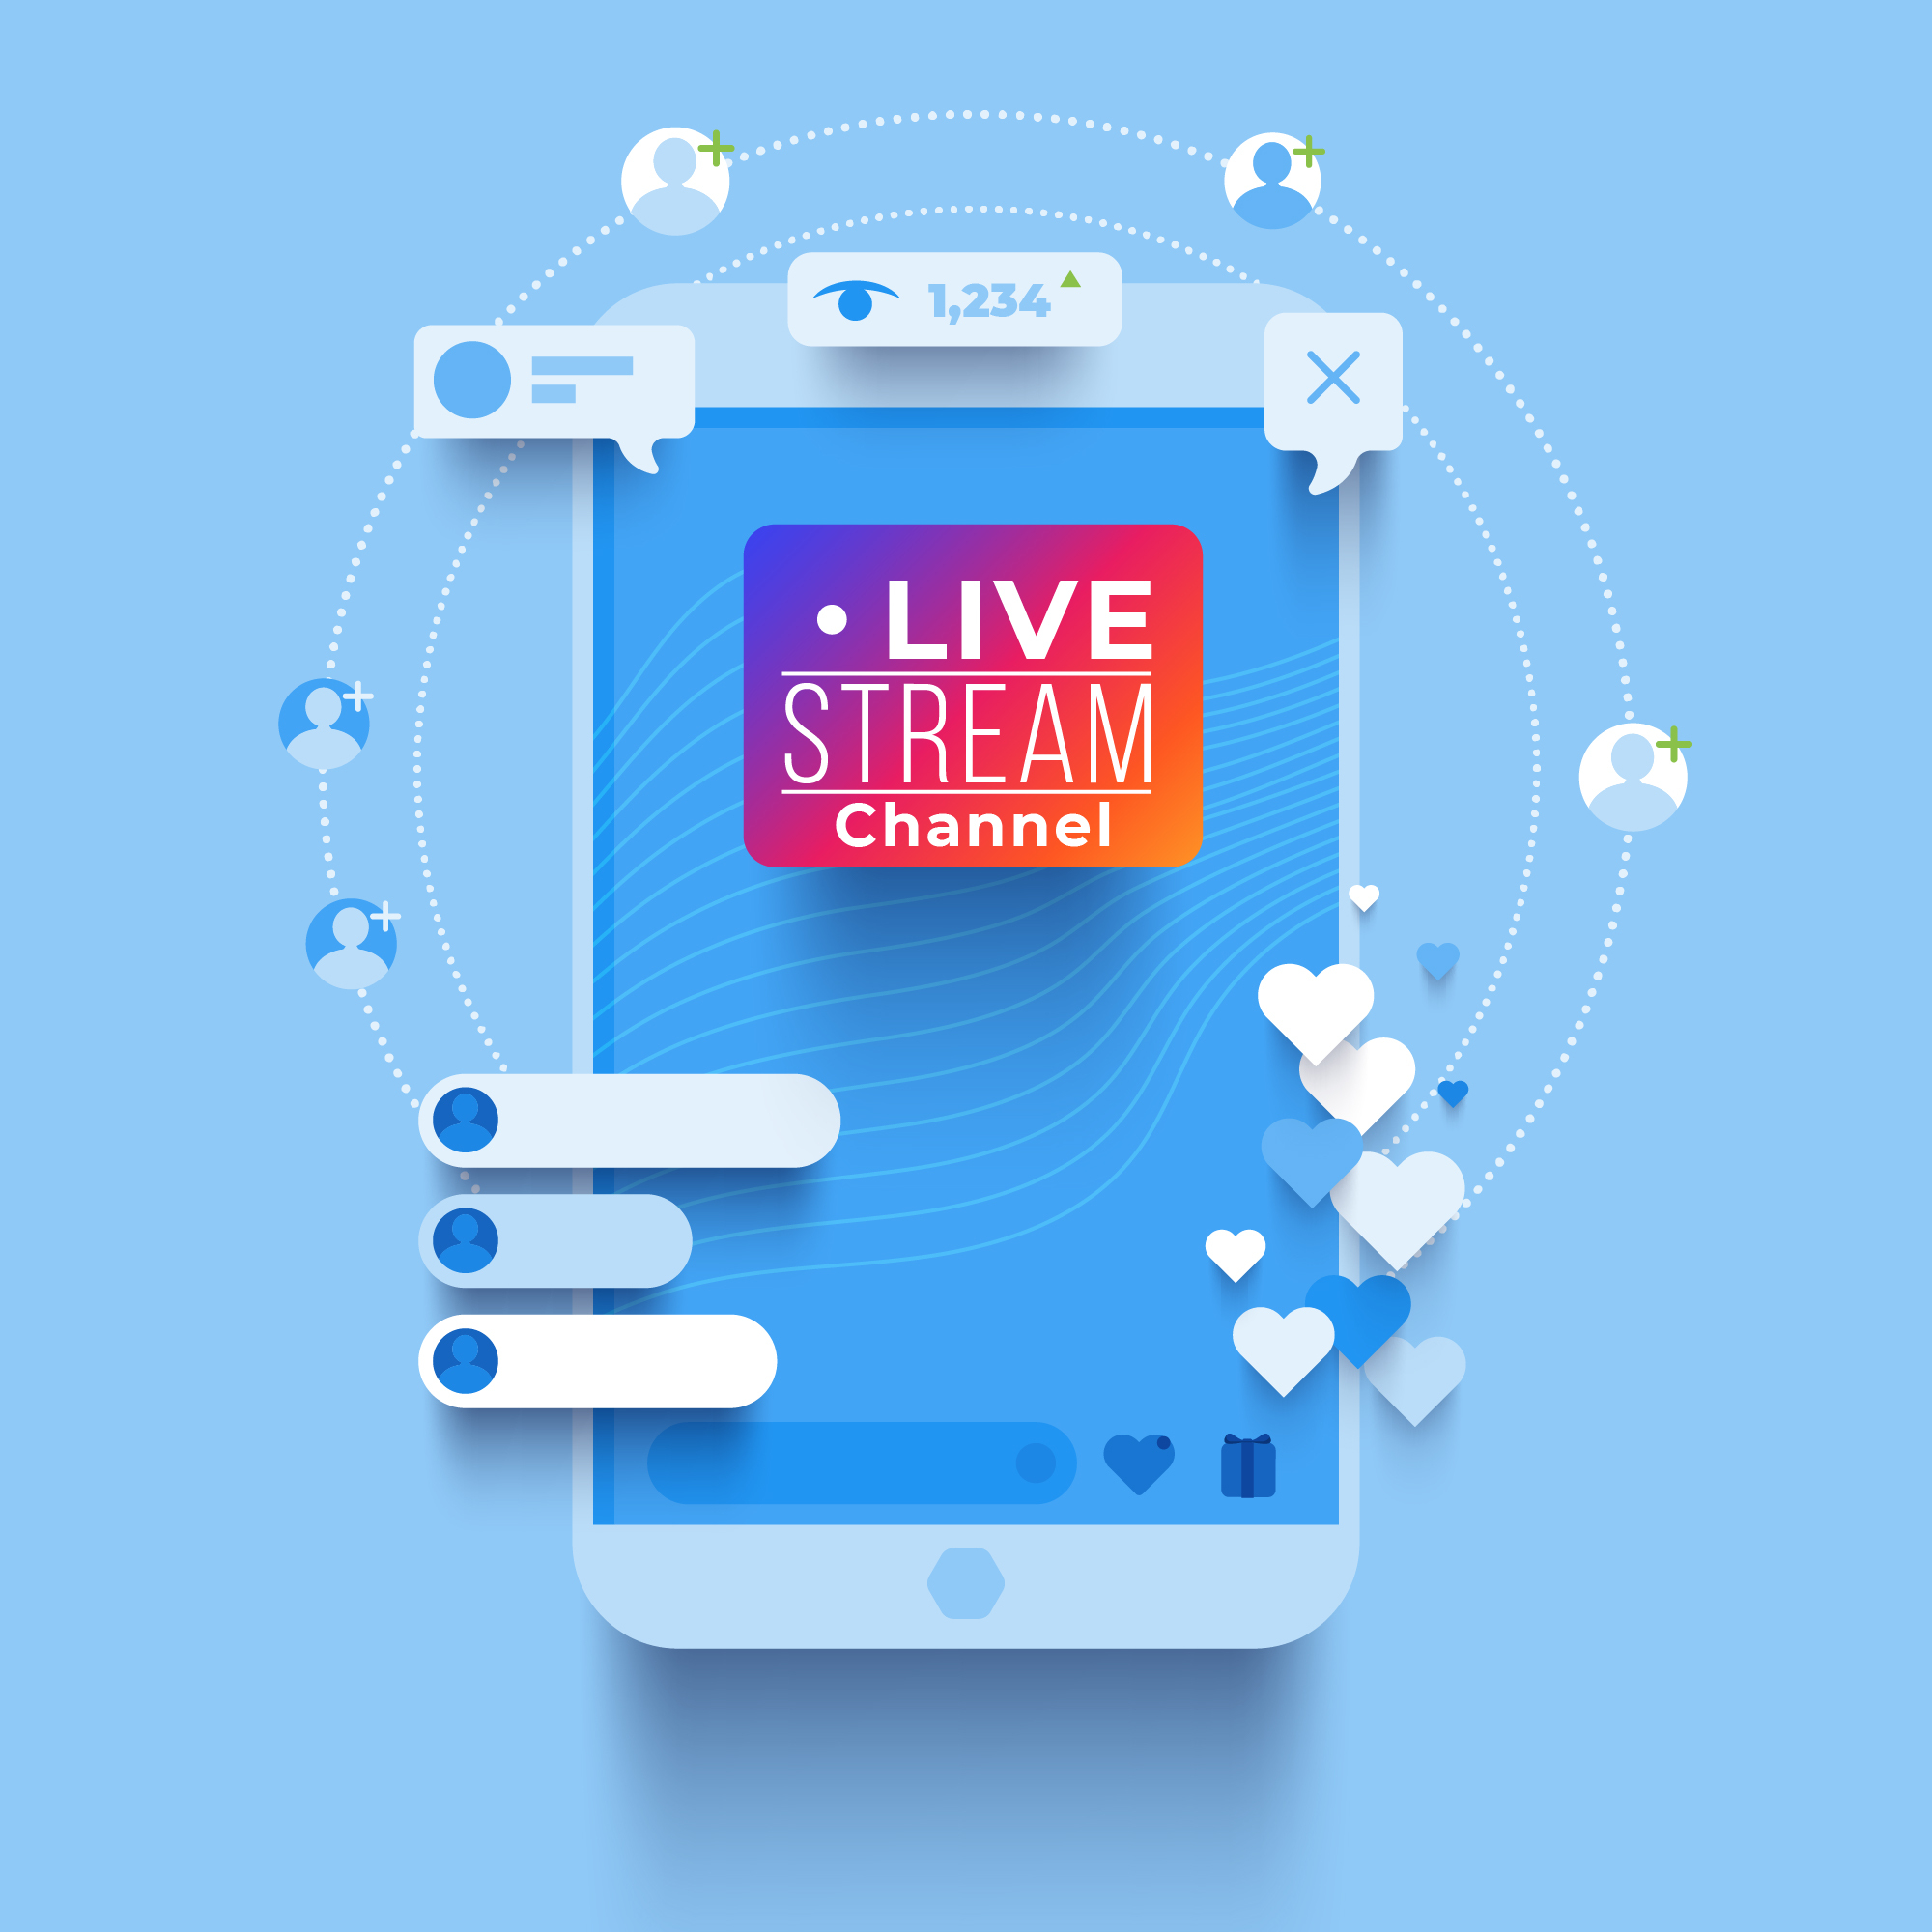 How to Stream a Live Event on Social Media